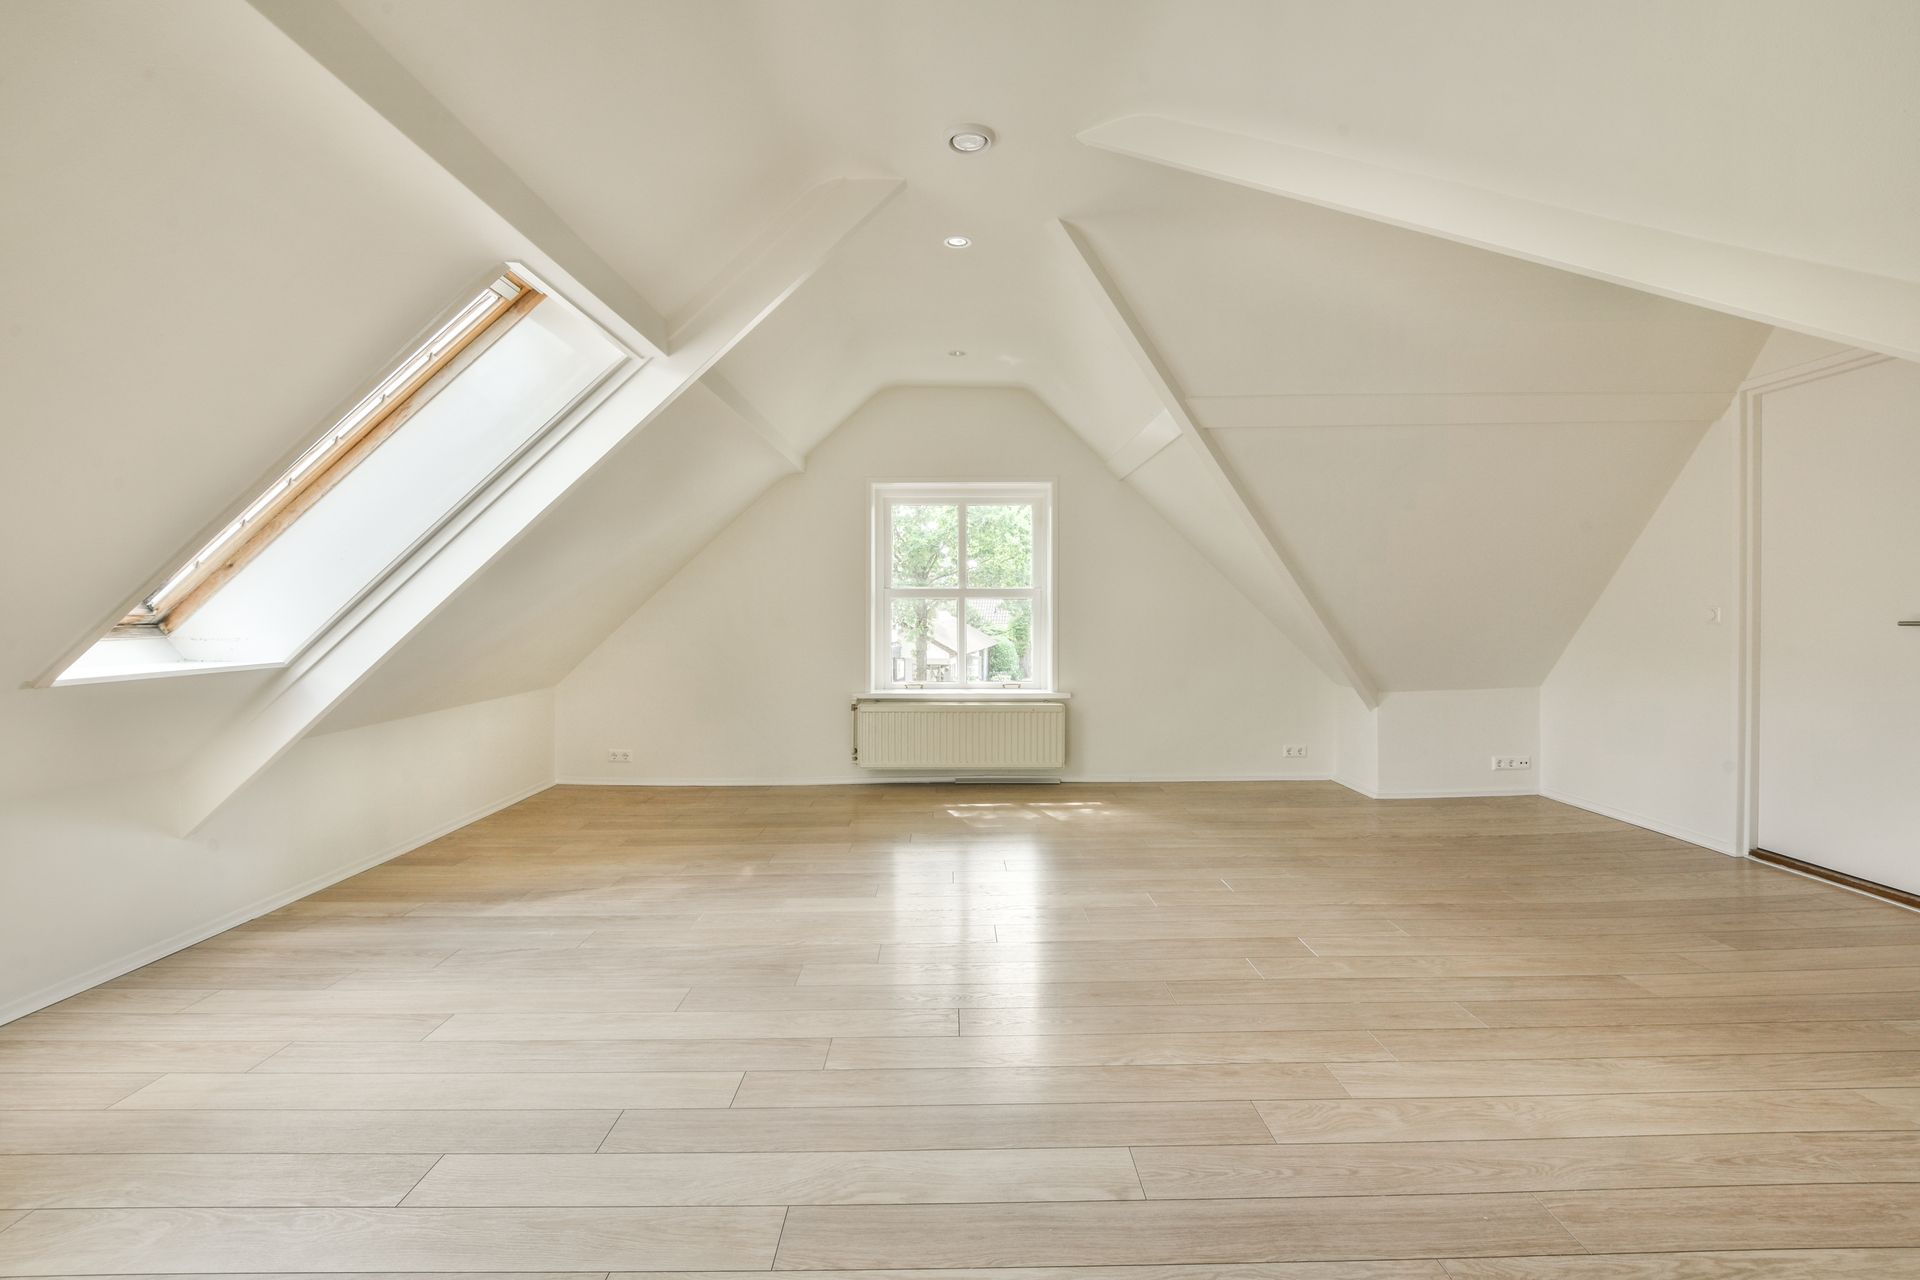 A Comprehensive Guide To Loft Conversion Planning Permission - Dos and Don'ts | Loft Conversions